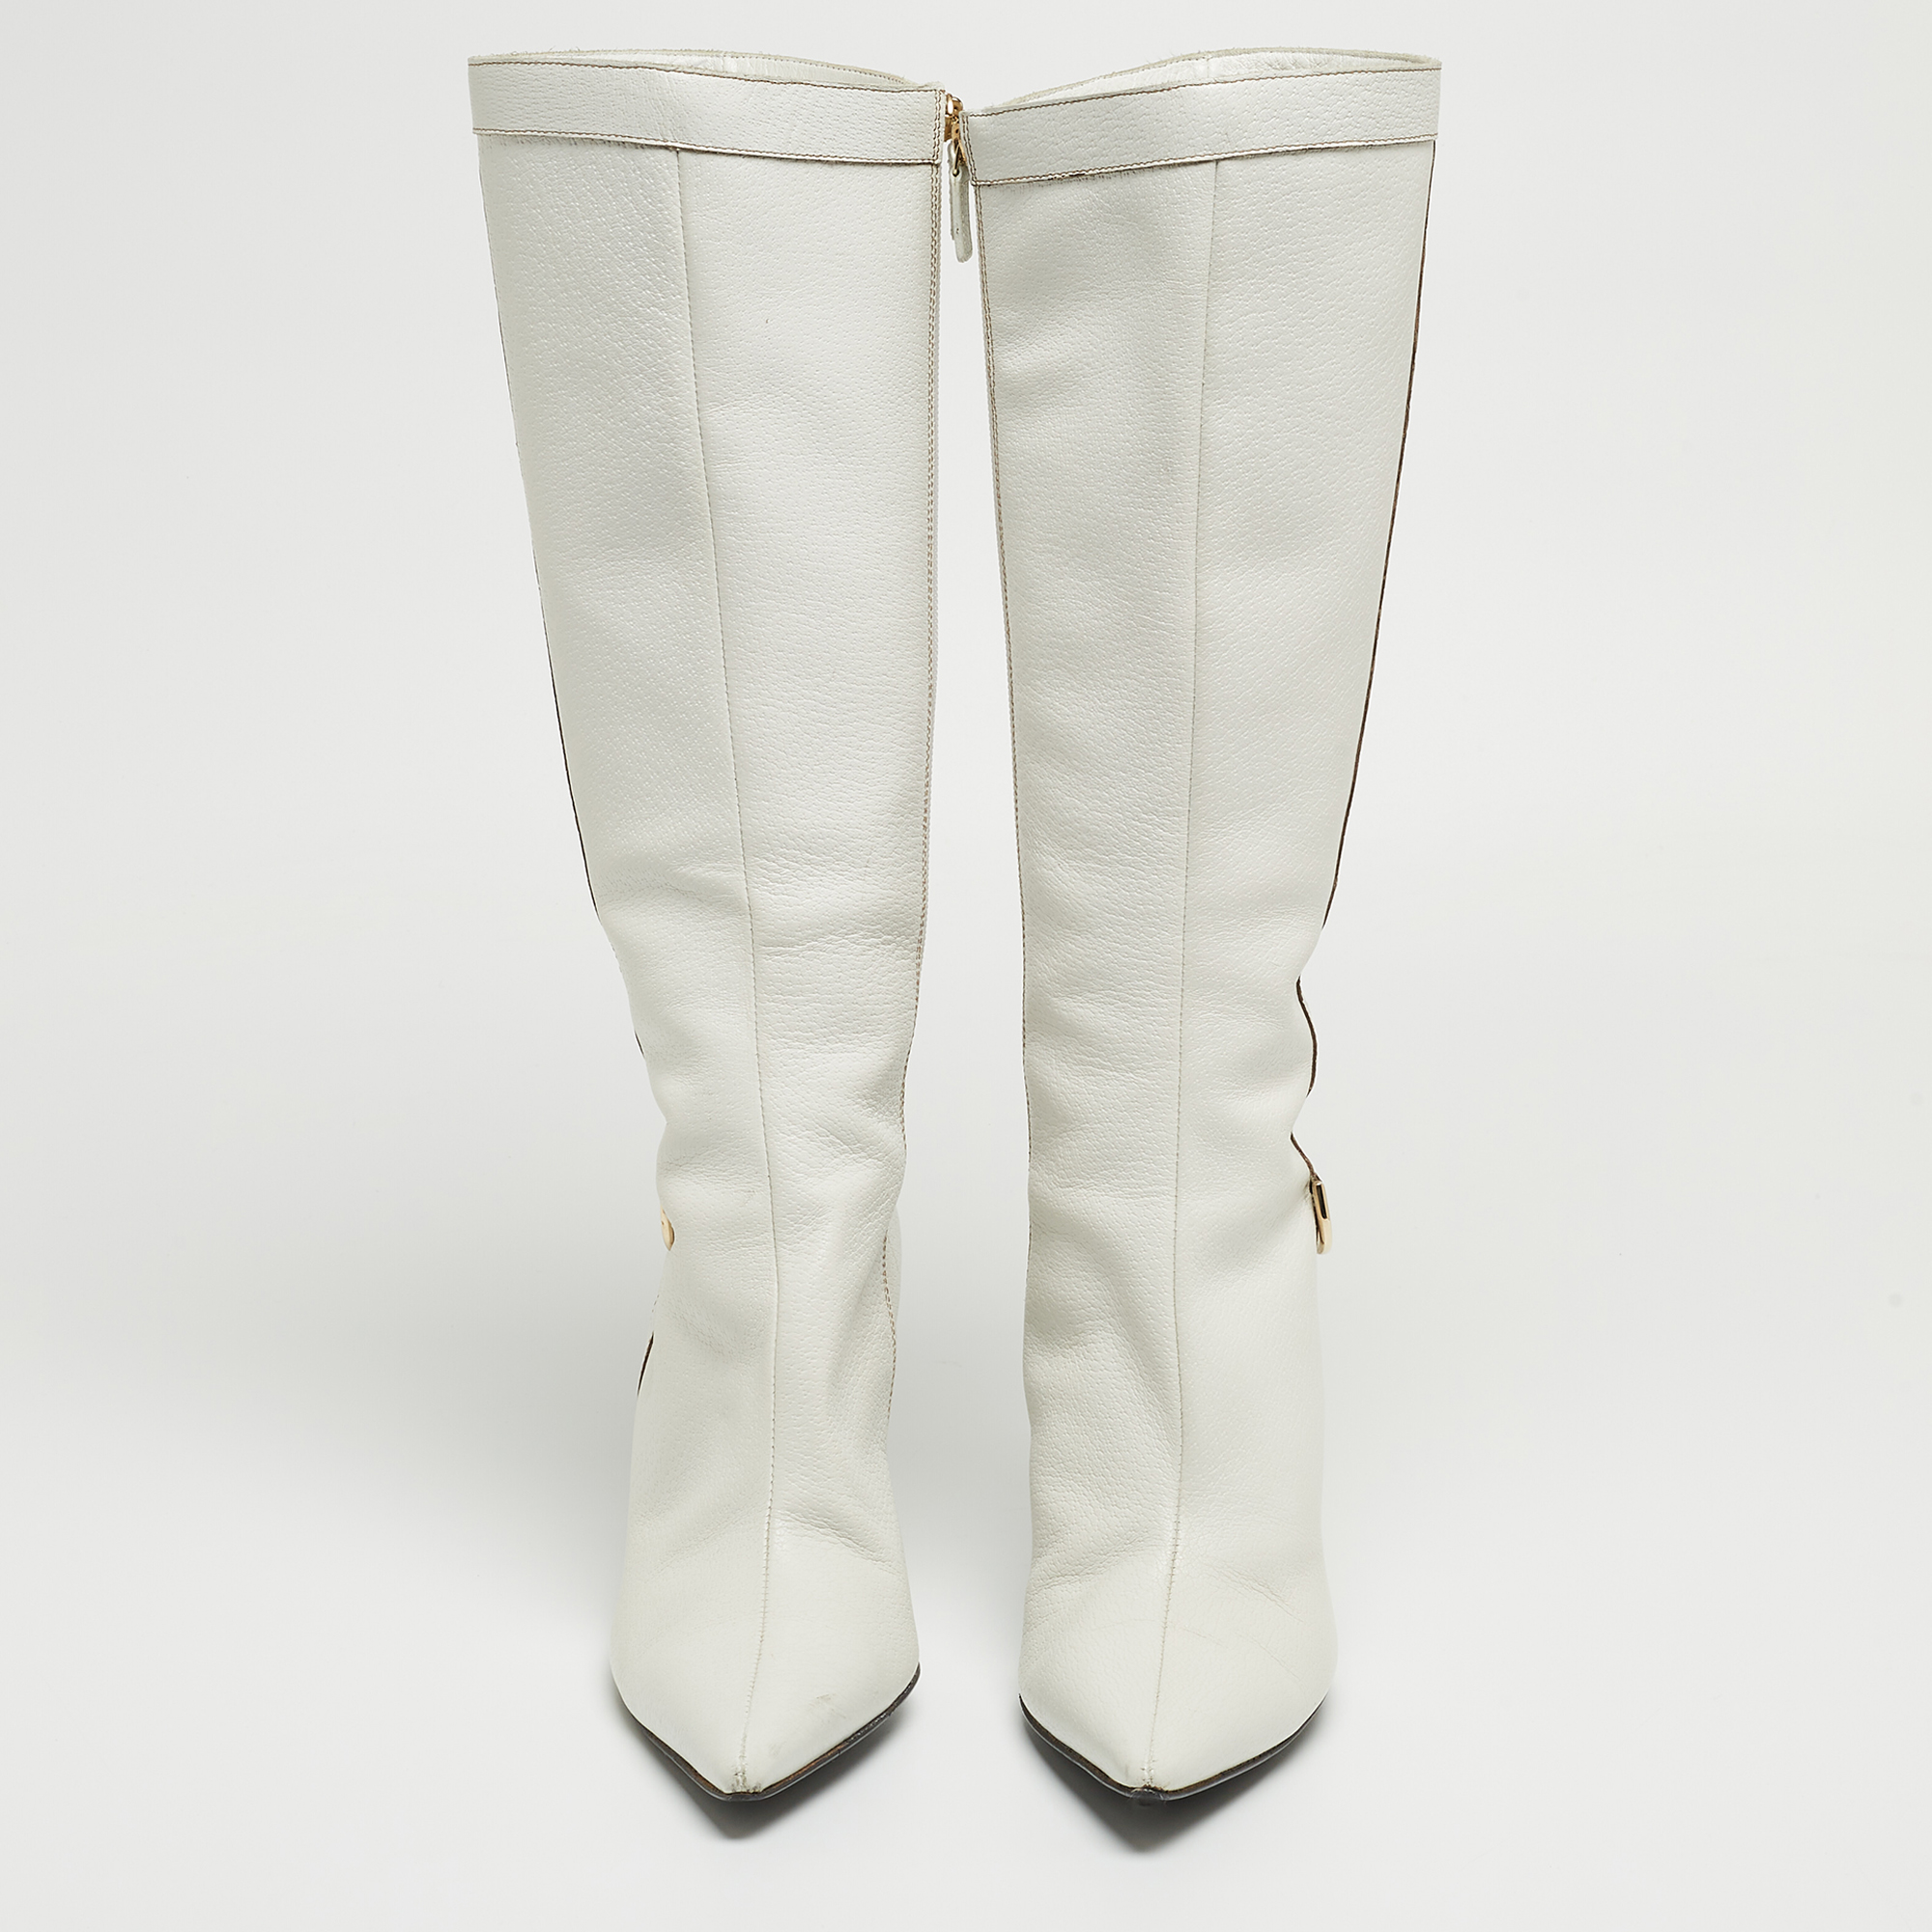 Gucci White Leather Pointed Toe Knee Length Boots Size 41